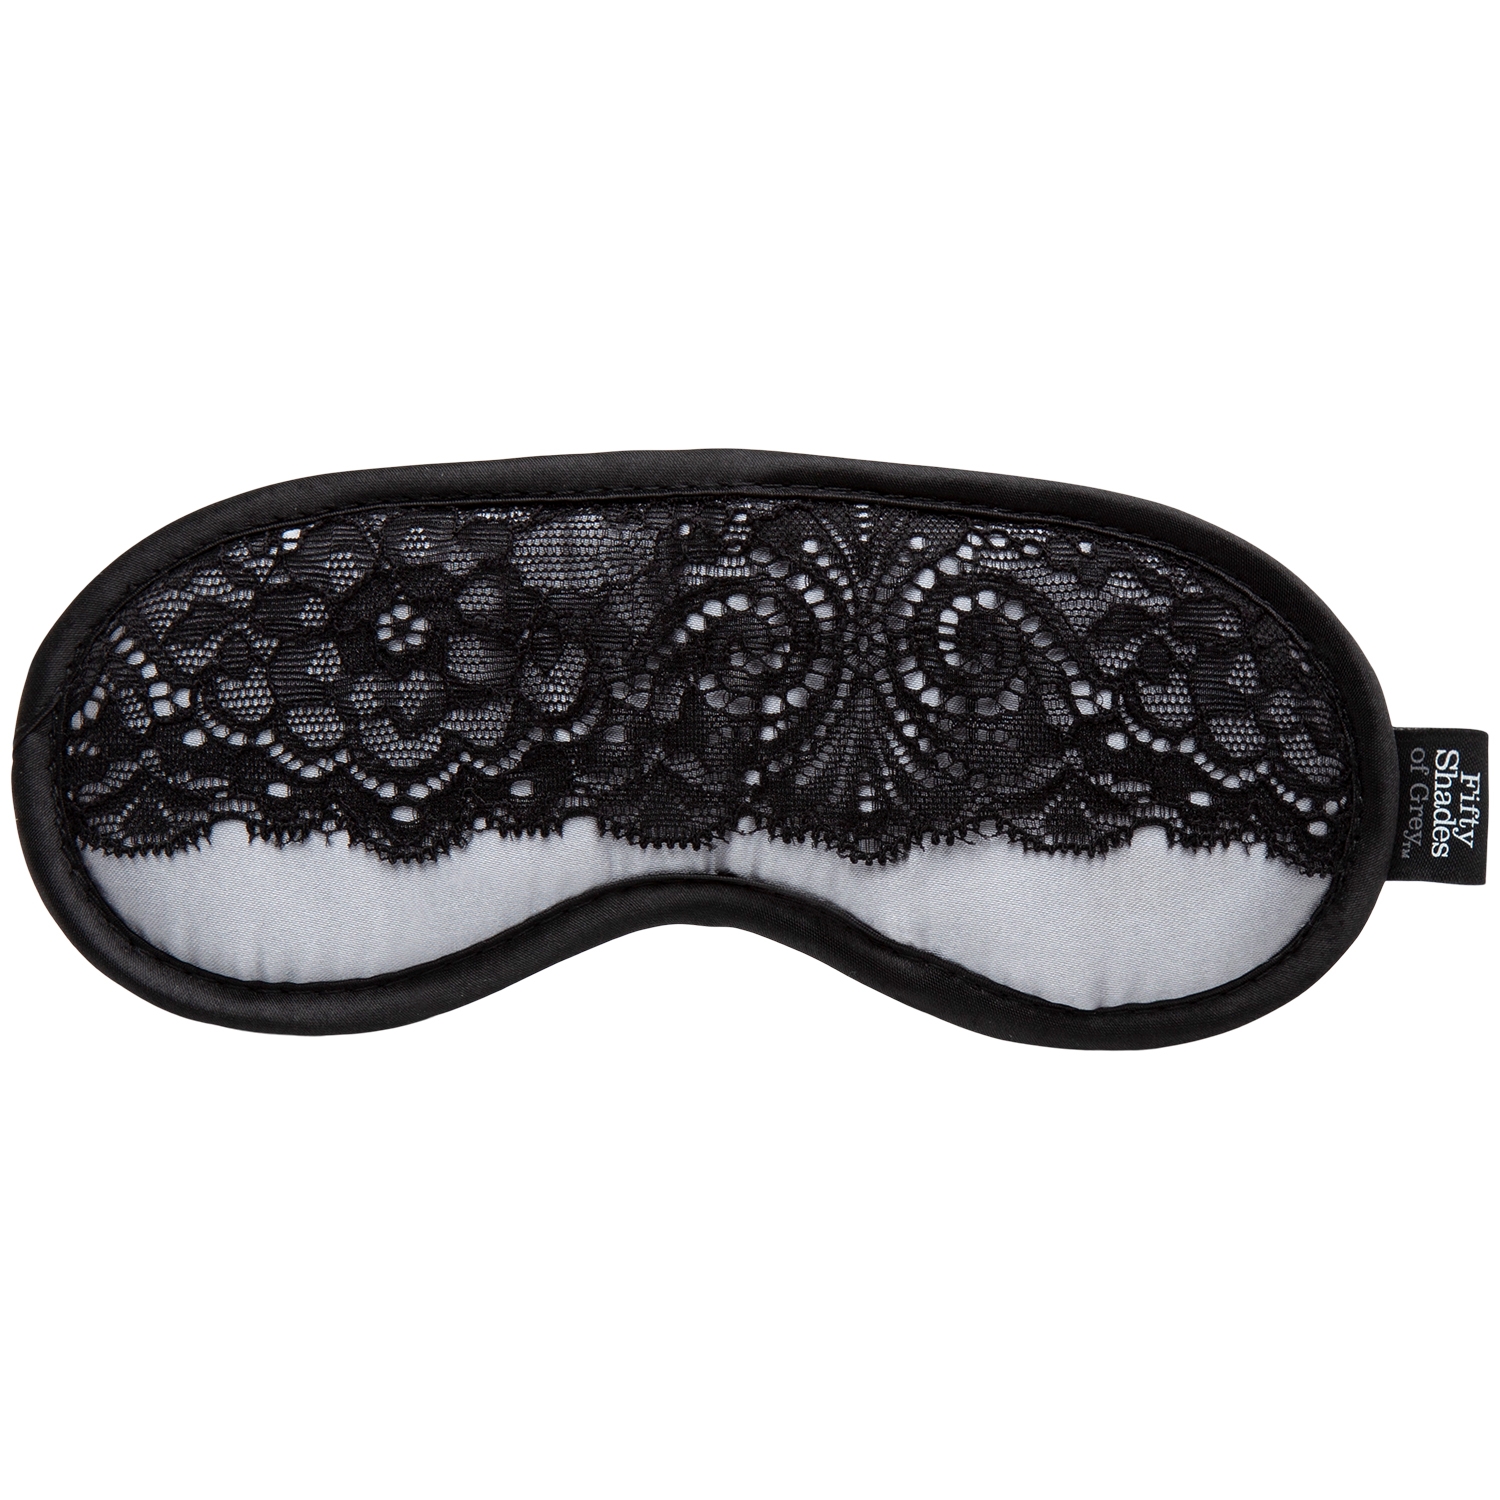 6: Fifty Shades of Grey Play Nice Satin Blindfold      - Black - One Size